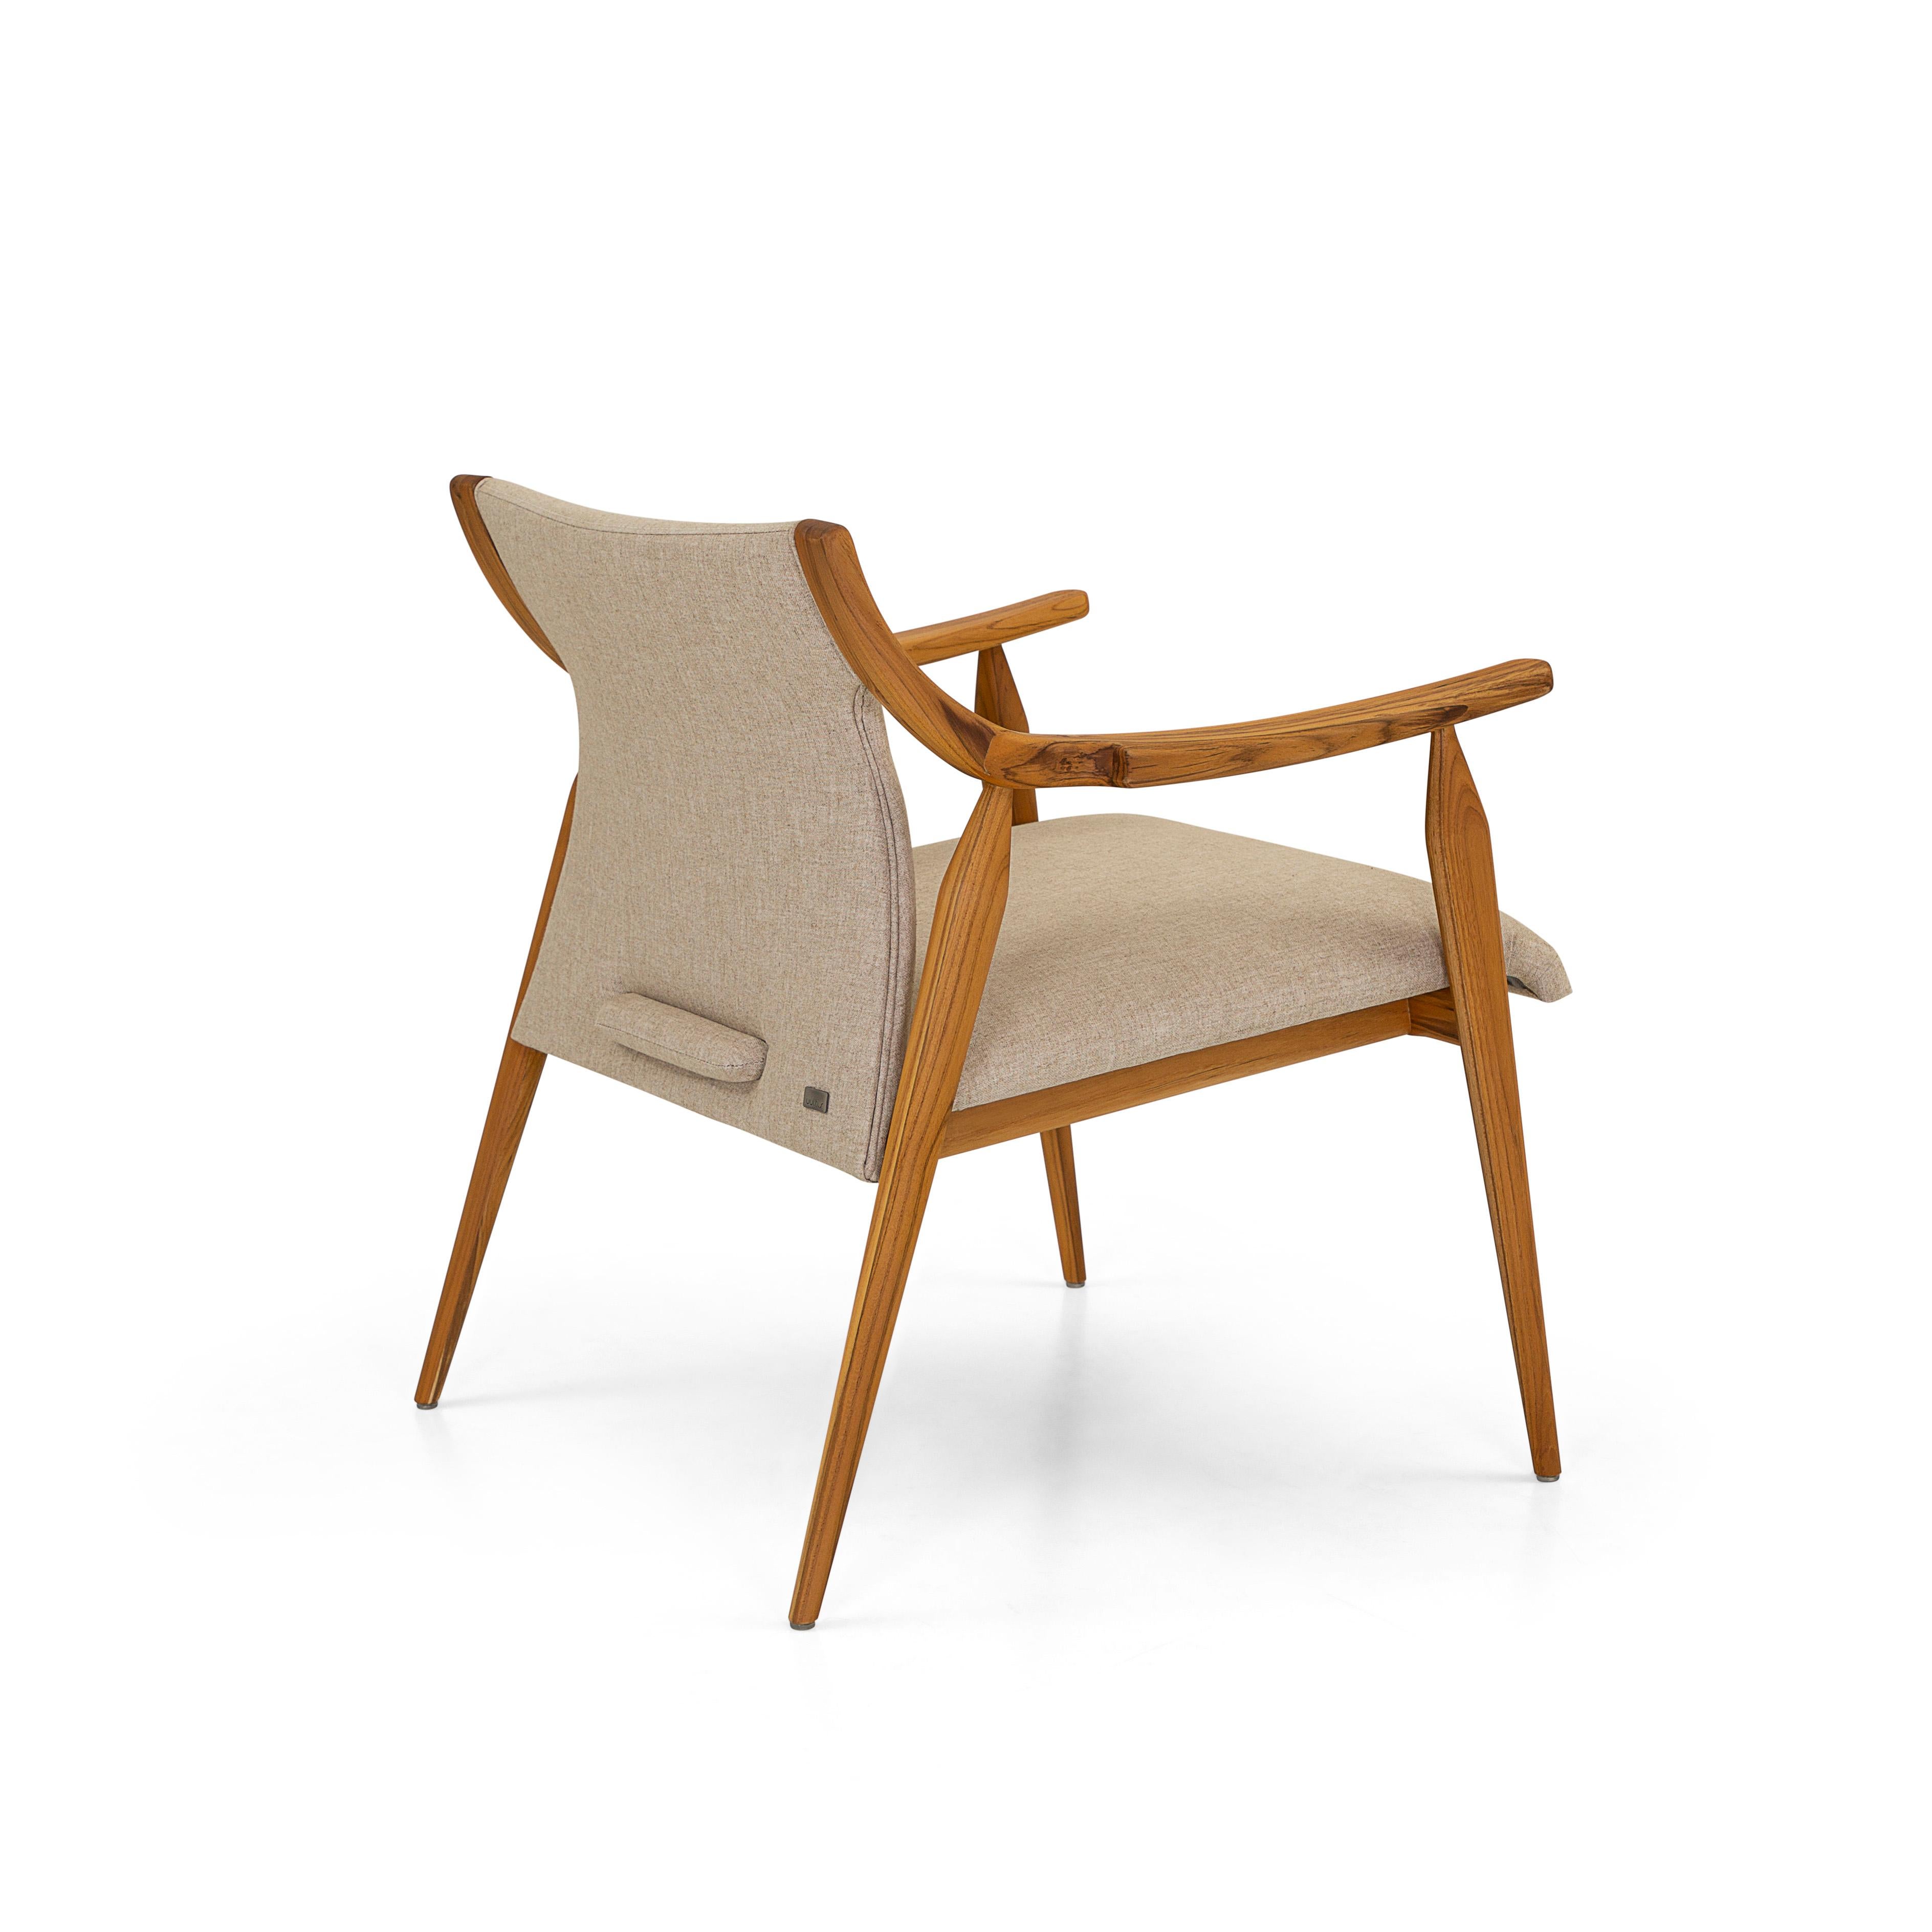 Brazilian Mince Armchair Featuring Curved Arms and Spindle Legs in Teak Wood Finish For Sale